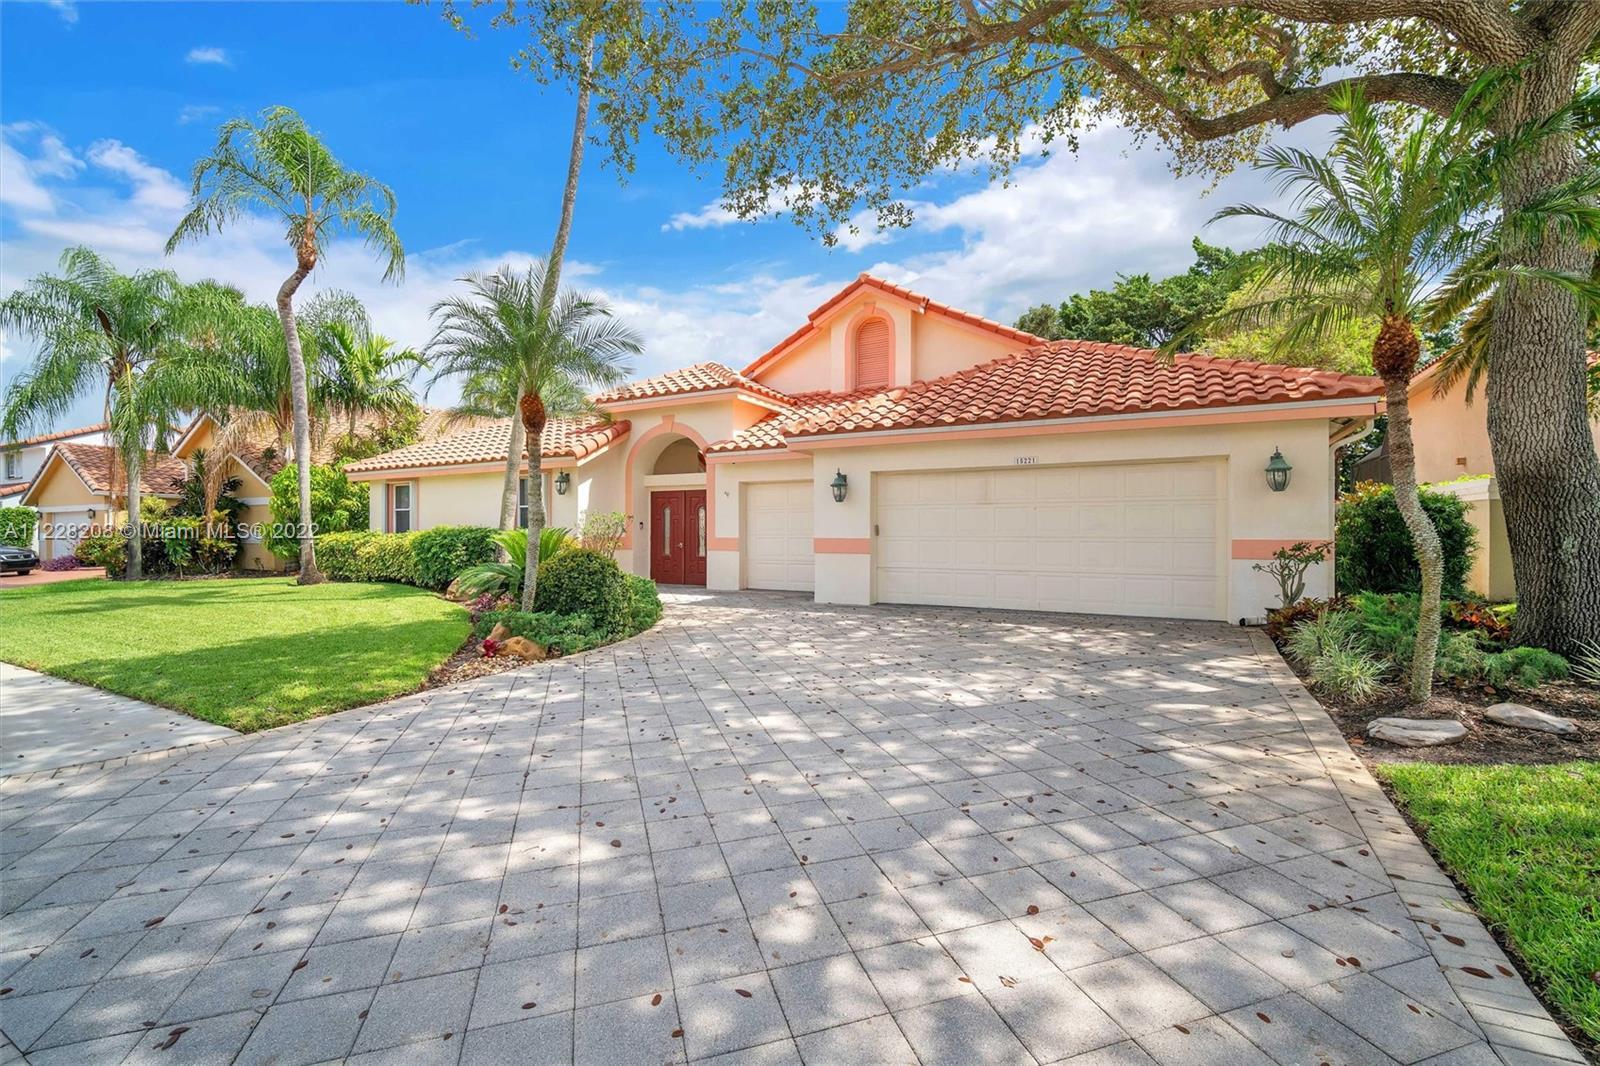 Coveted and rarely available courtyard pool home located in the desirable gated community of the Lau